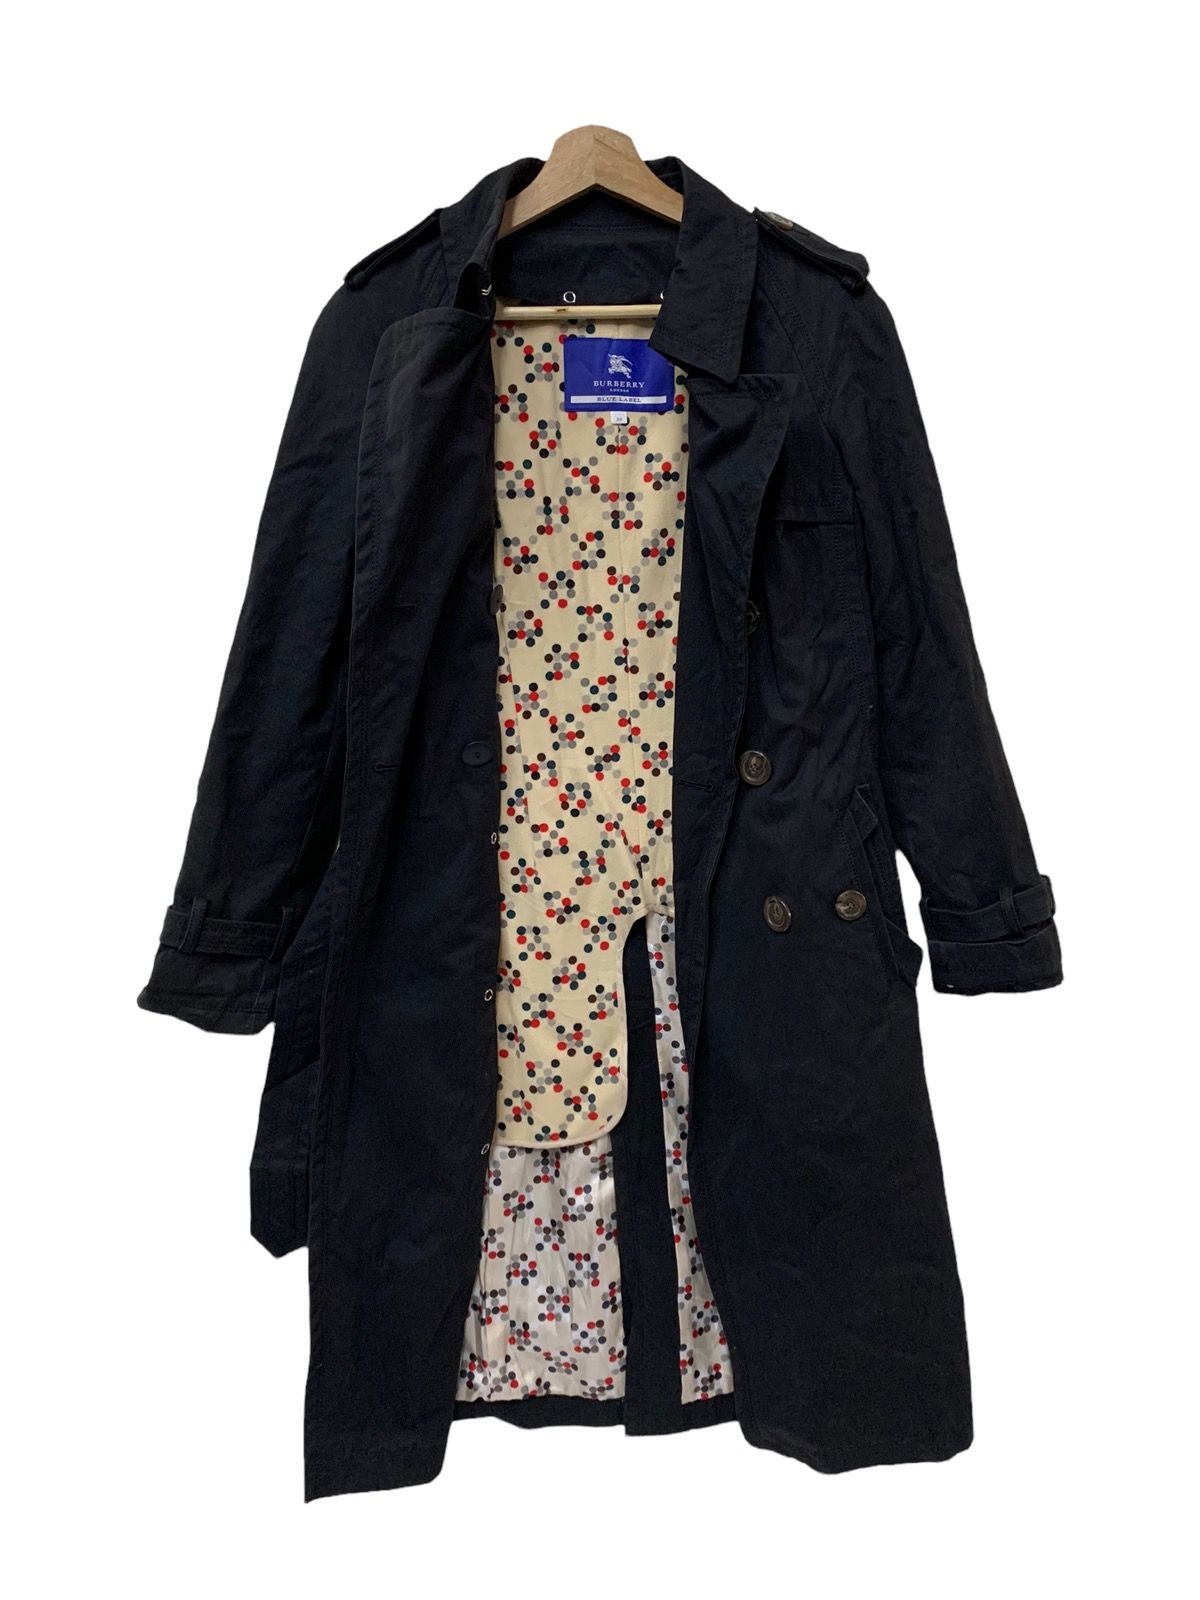 🔥BURBERRY BLUE LABEL WOOL CHERRY LINED TRENCH COAT - 1